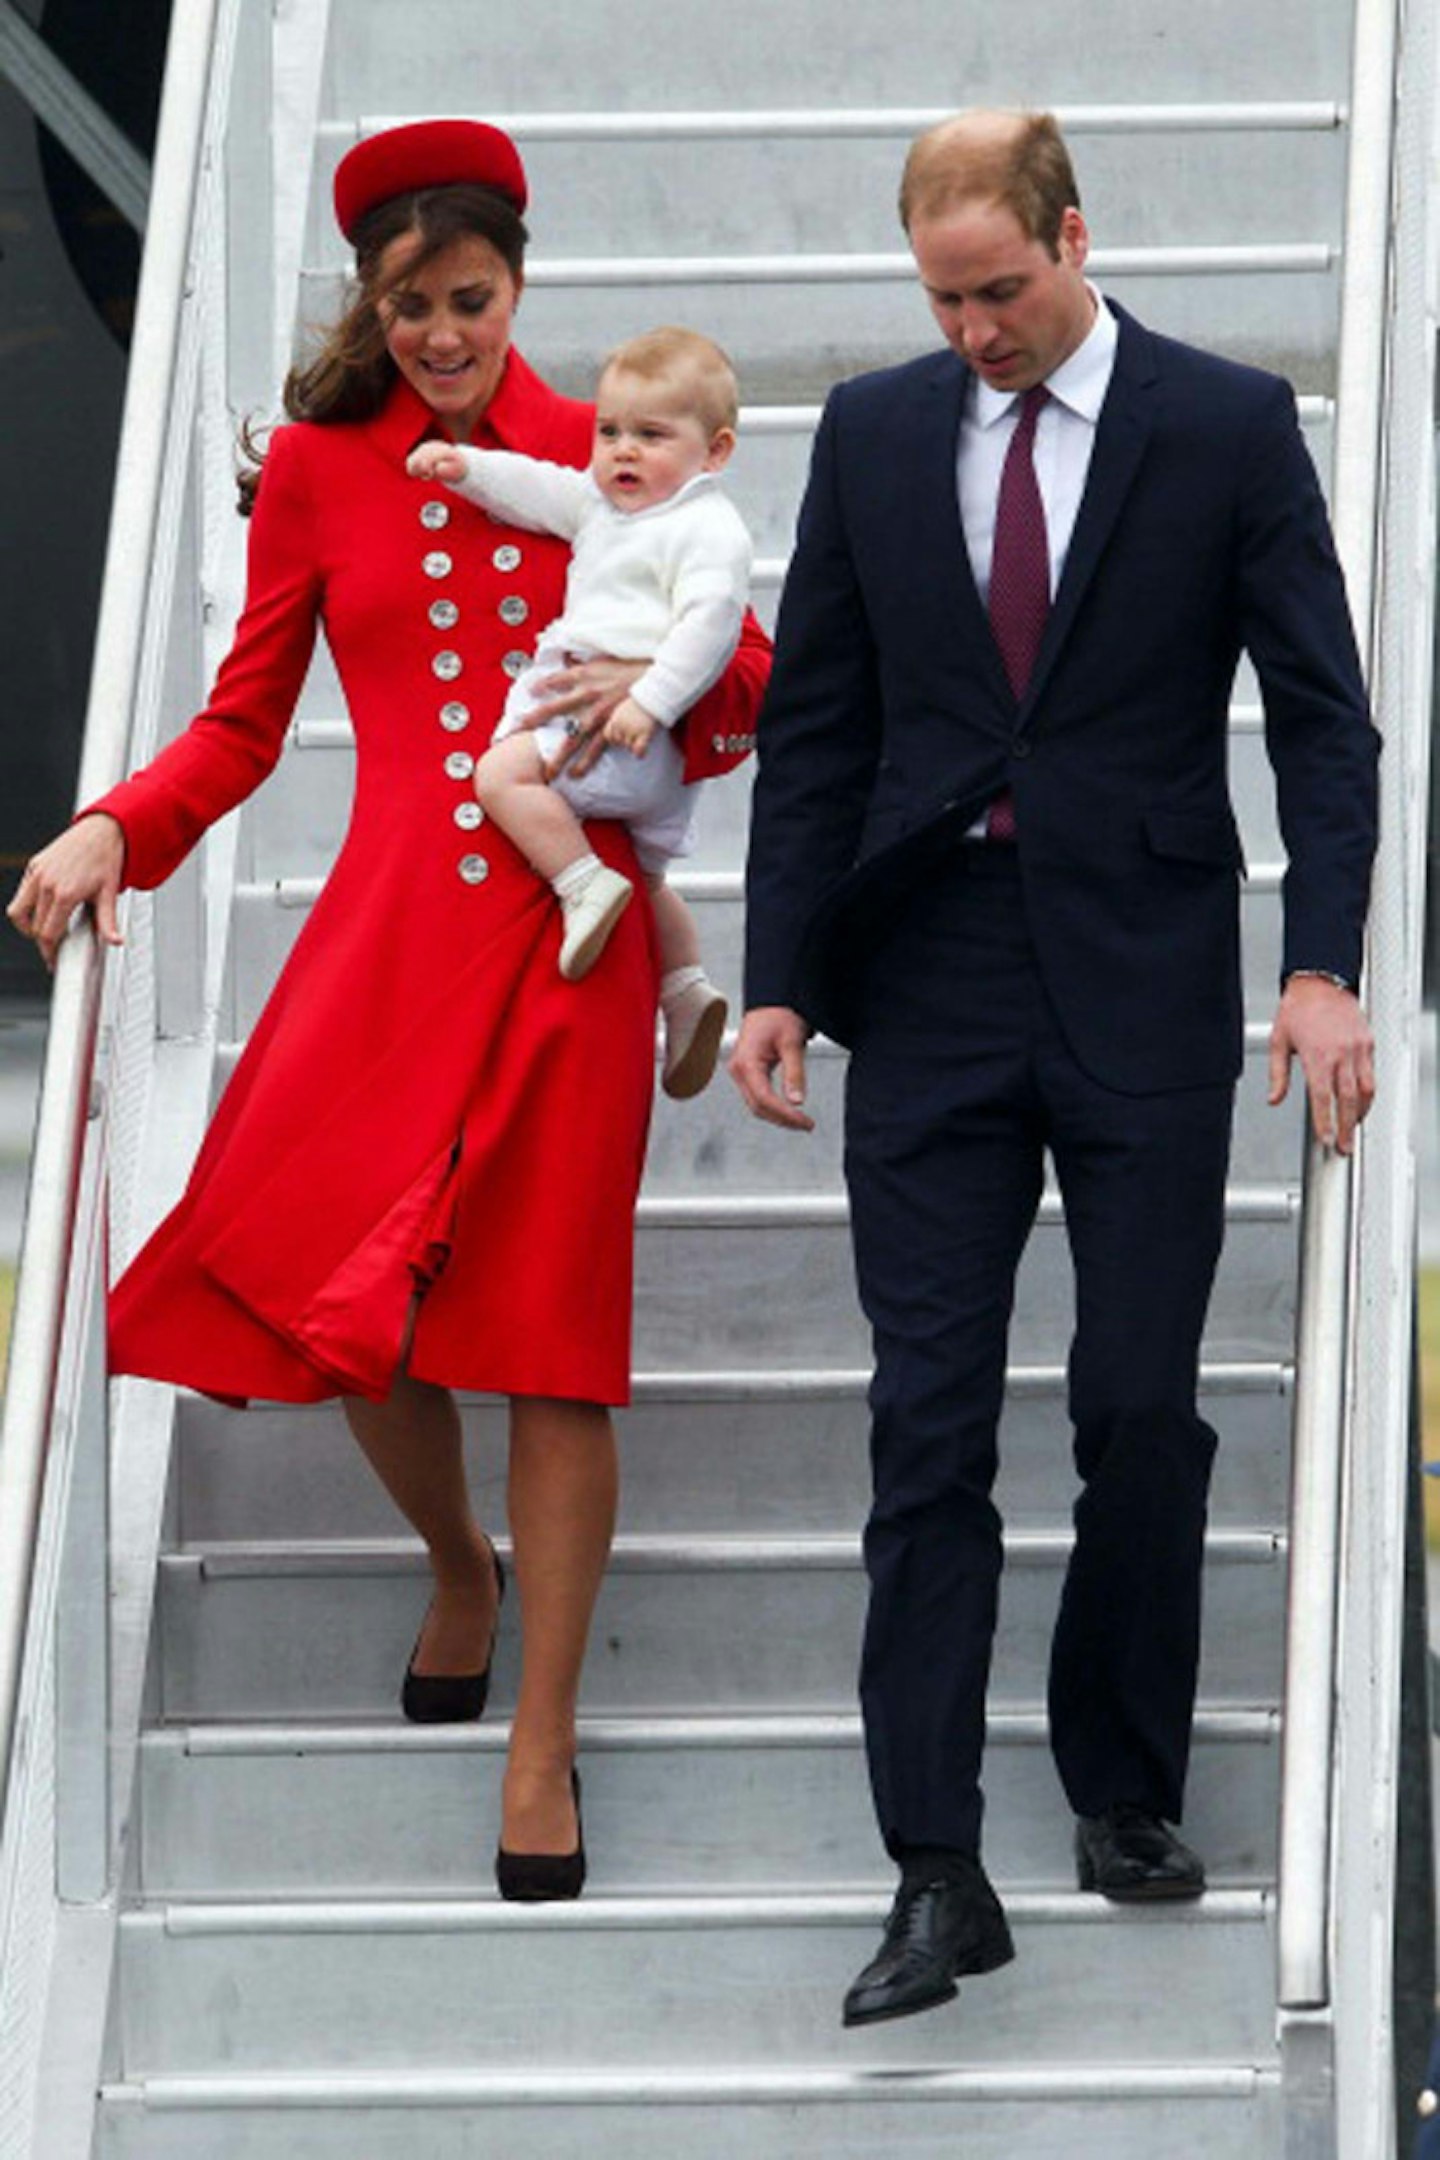 50-49. The royal couple land in Wellington, New Zealand in April 2014